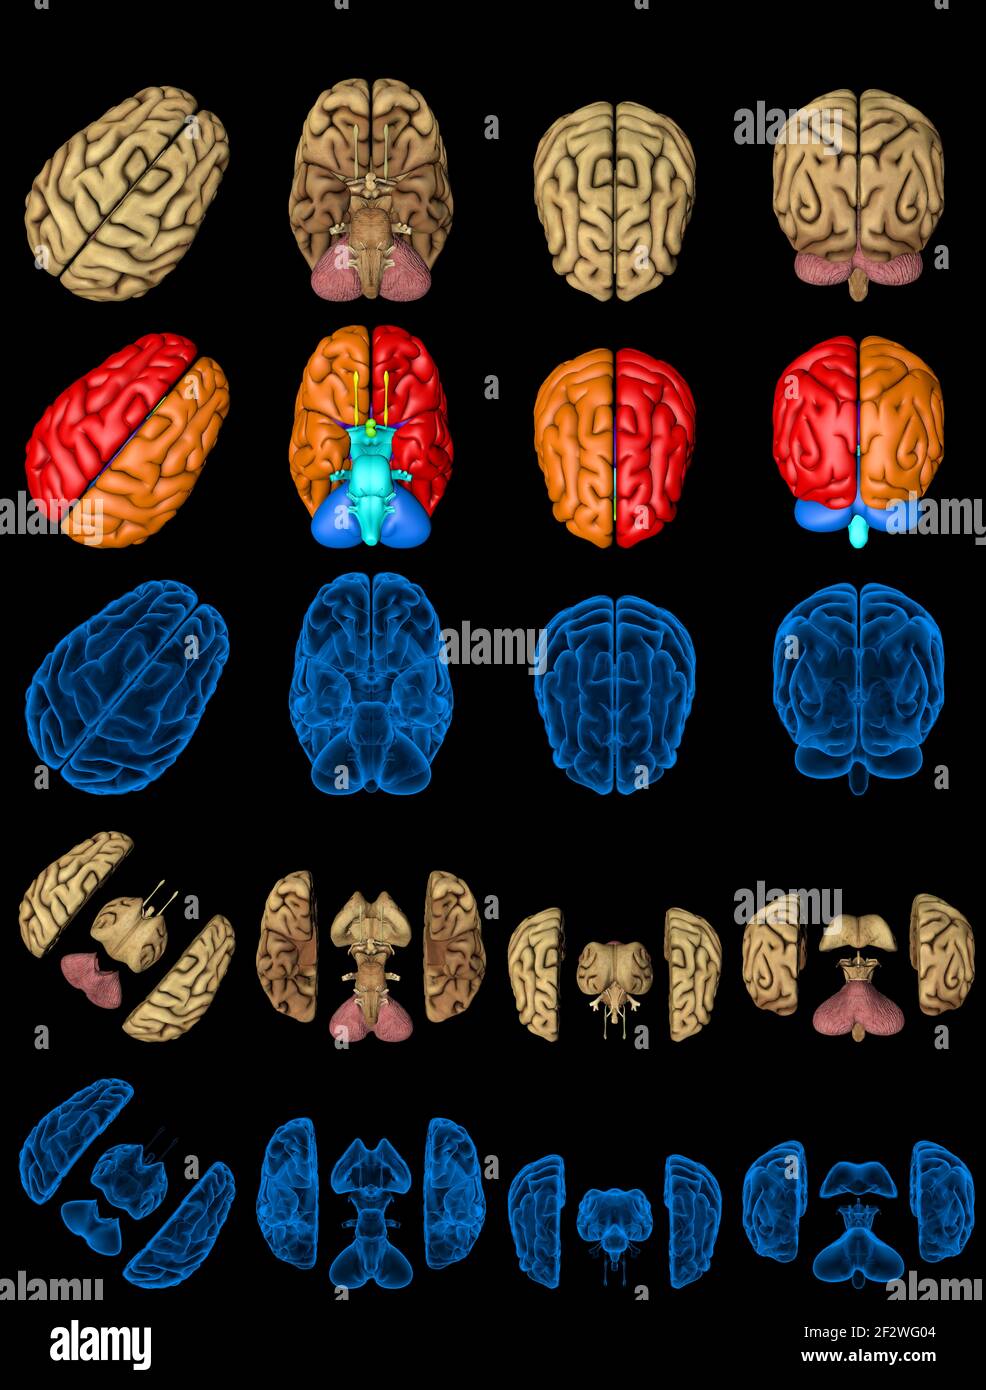 100 megapixels set - human brain with rontgen style image and colored zones isolated, intellect study concept - cg high detailed medical 3D illustrati Stock Photo